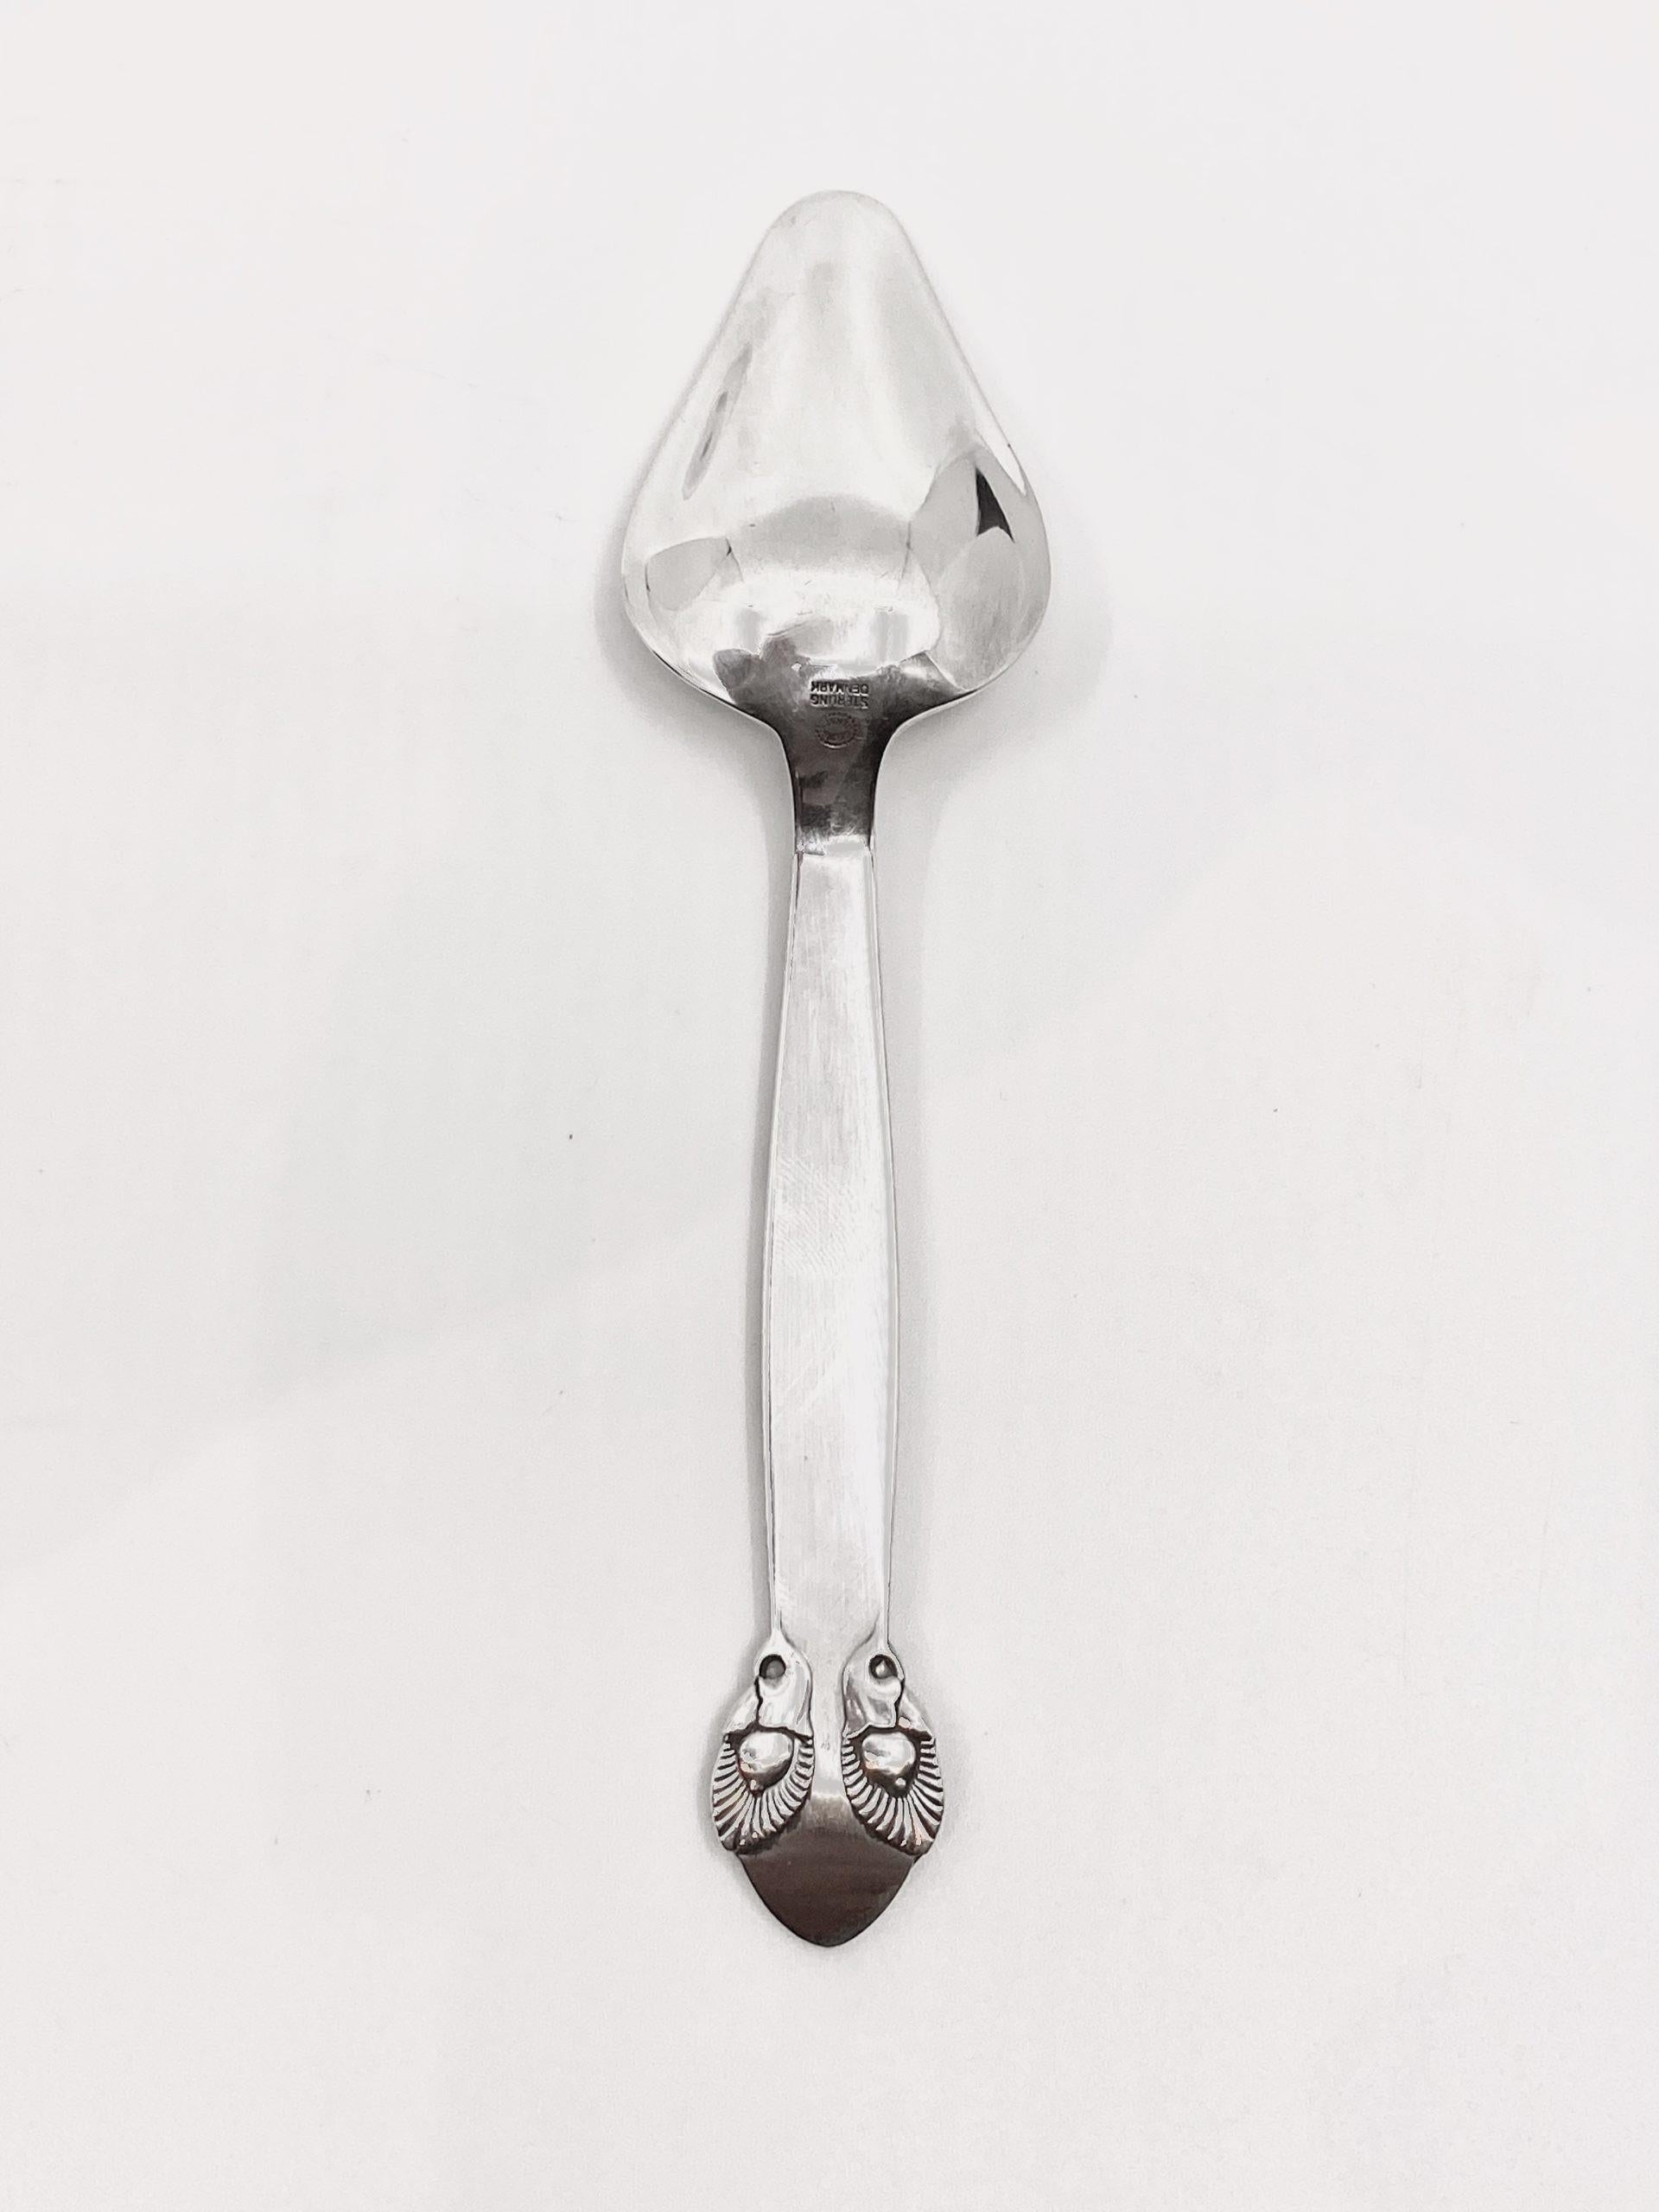 A sterling silver Georg Jensen grapefruit spoon, item #075 in the very rare Bittersweet pattern, design #79 from 1940 by Gundorph Albertus. This is the sister pattern to Cactus, also designed by Gundorph Albertus.

Additional information:
Material: